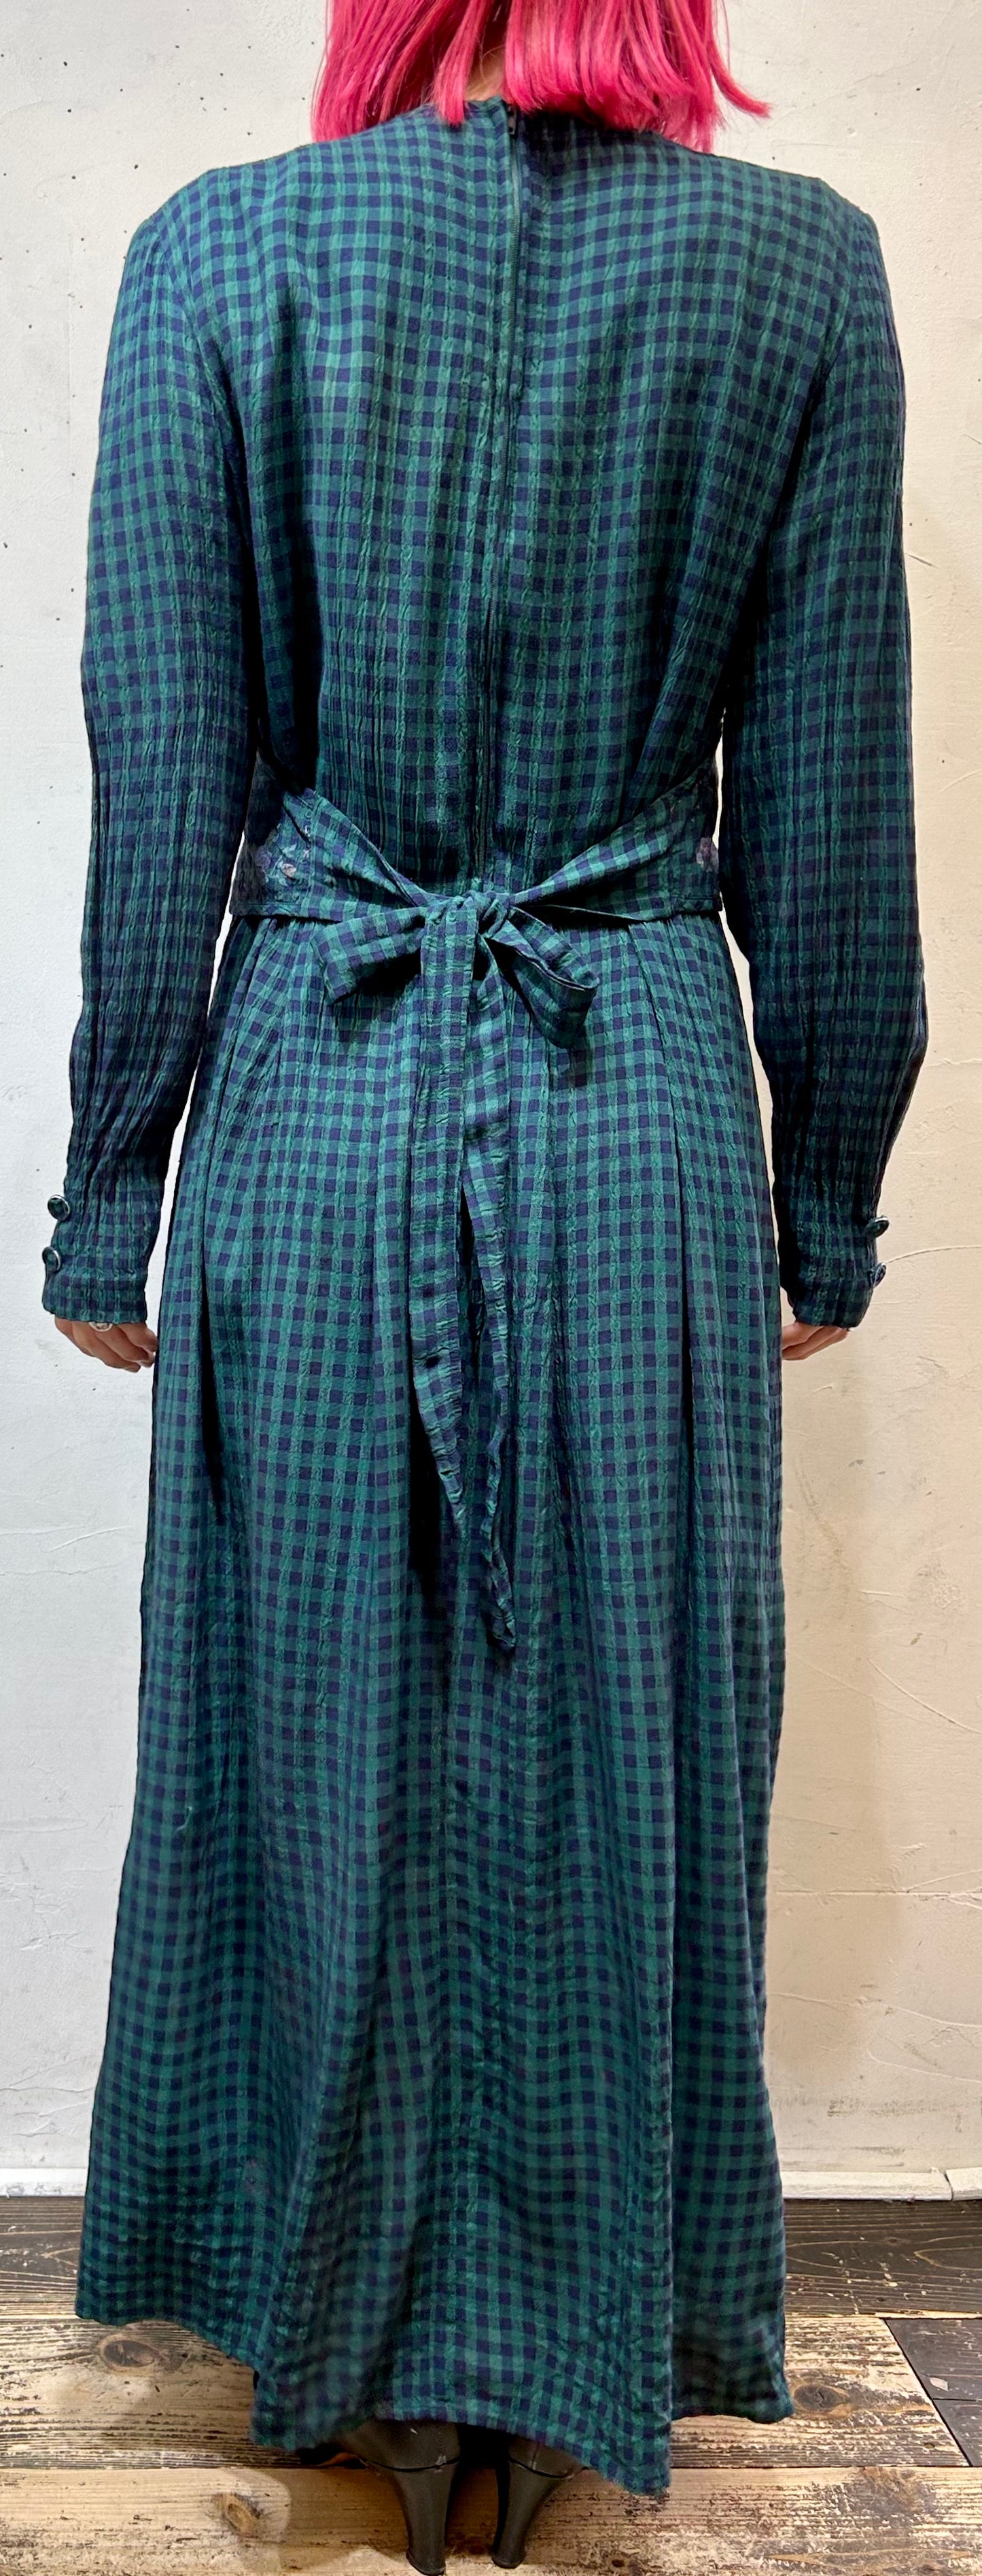 Vintage Layered Style Dress MADE IN USA [J25197]